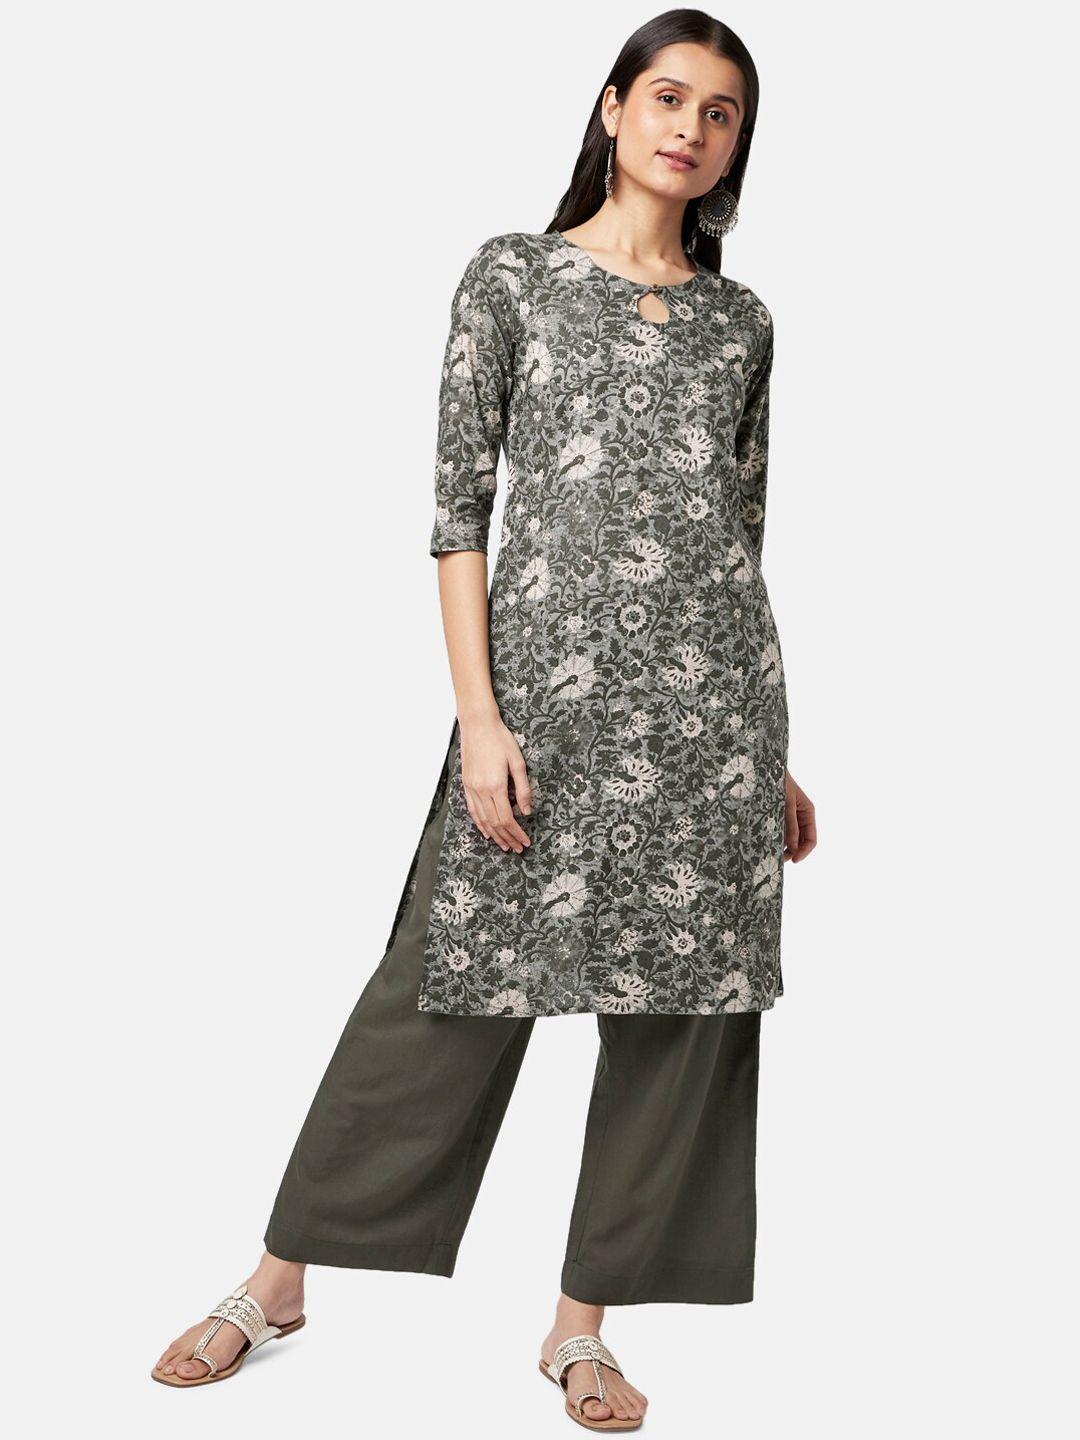 rangmanch by pantaloons women charcoal floral printed pure cotton kurta with trousers